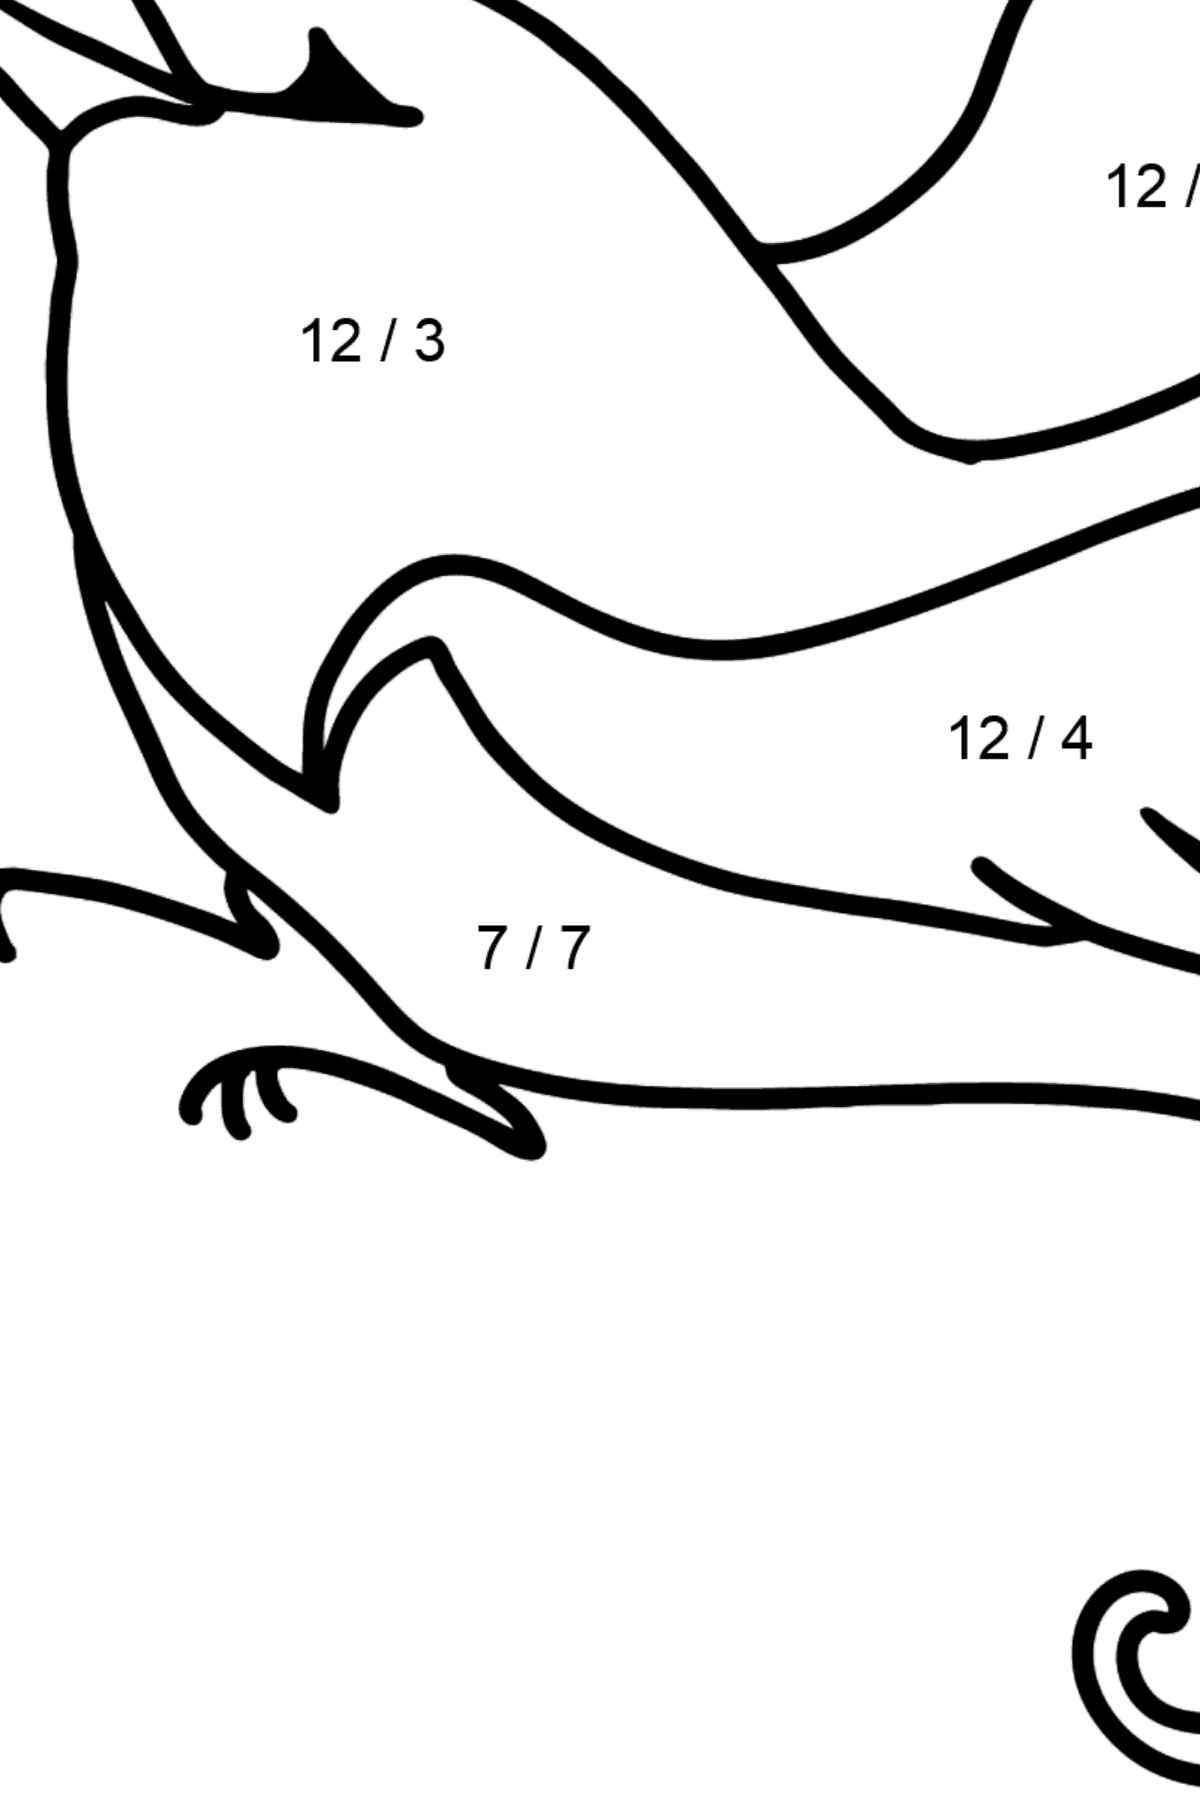 Hummingbird coloring page - Math Coloring - Division for Kids